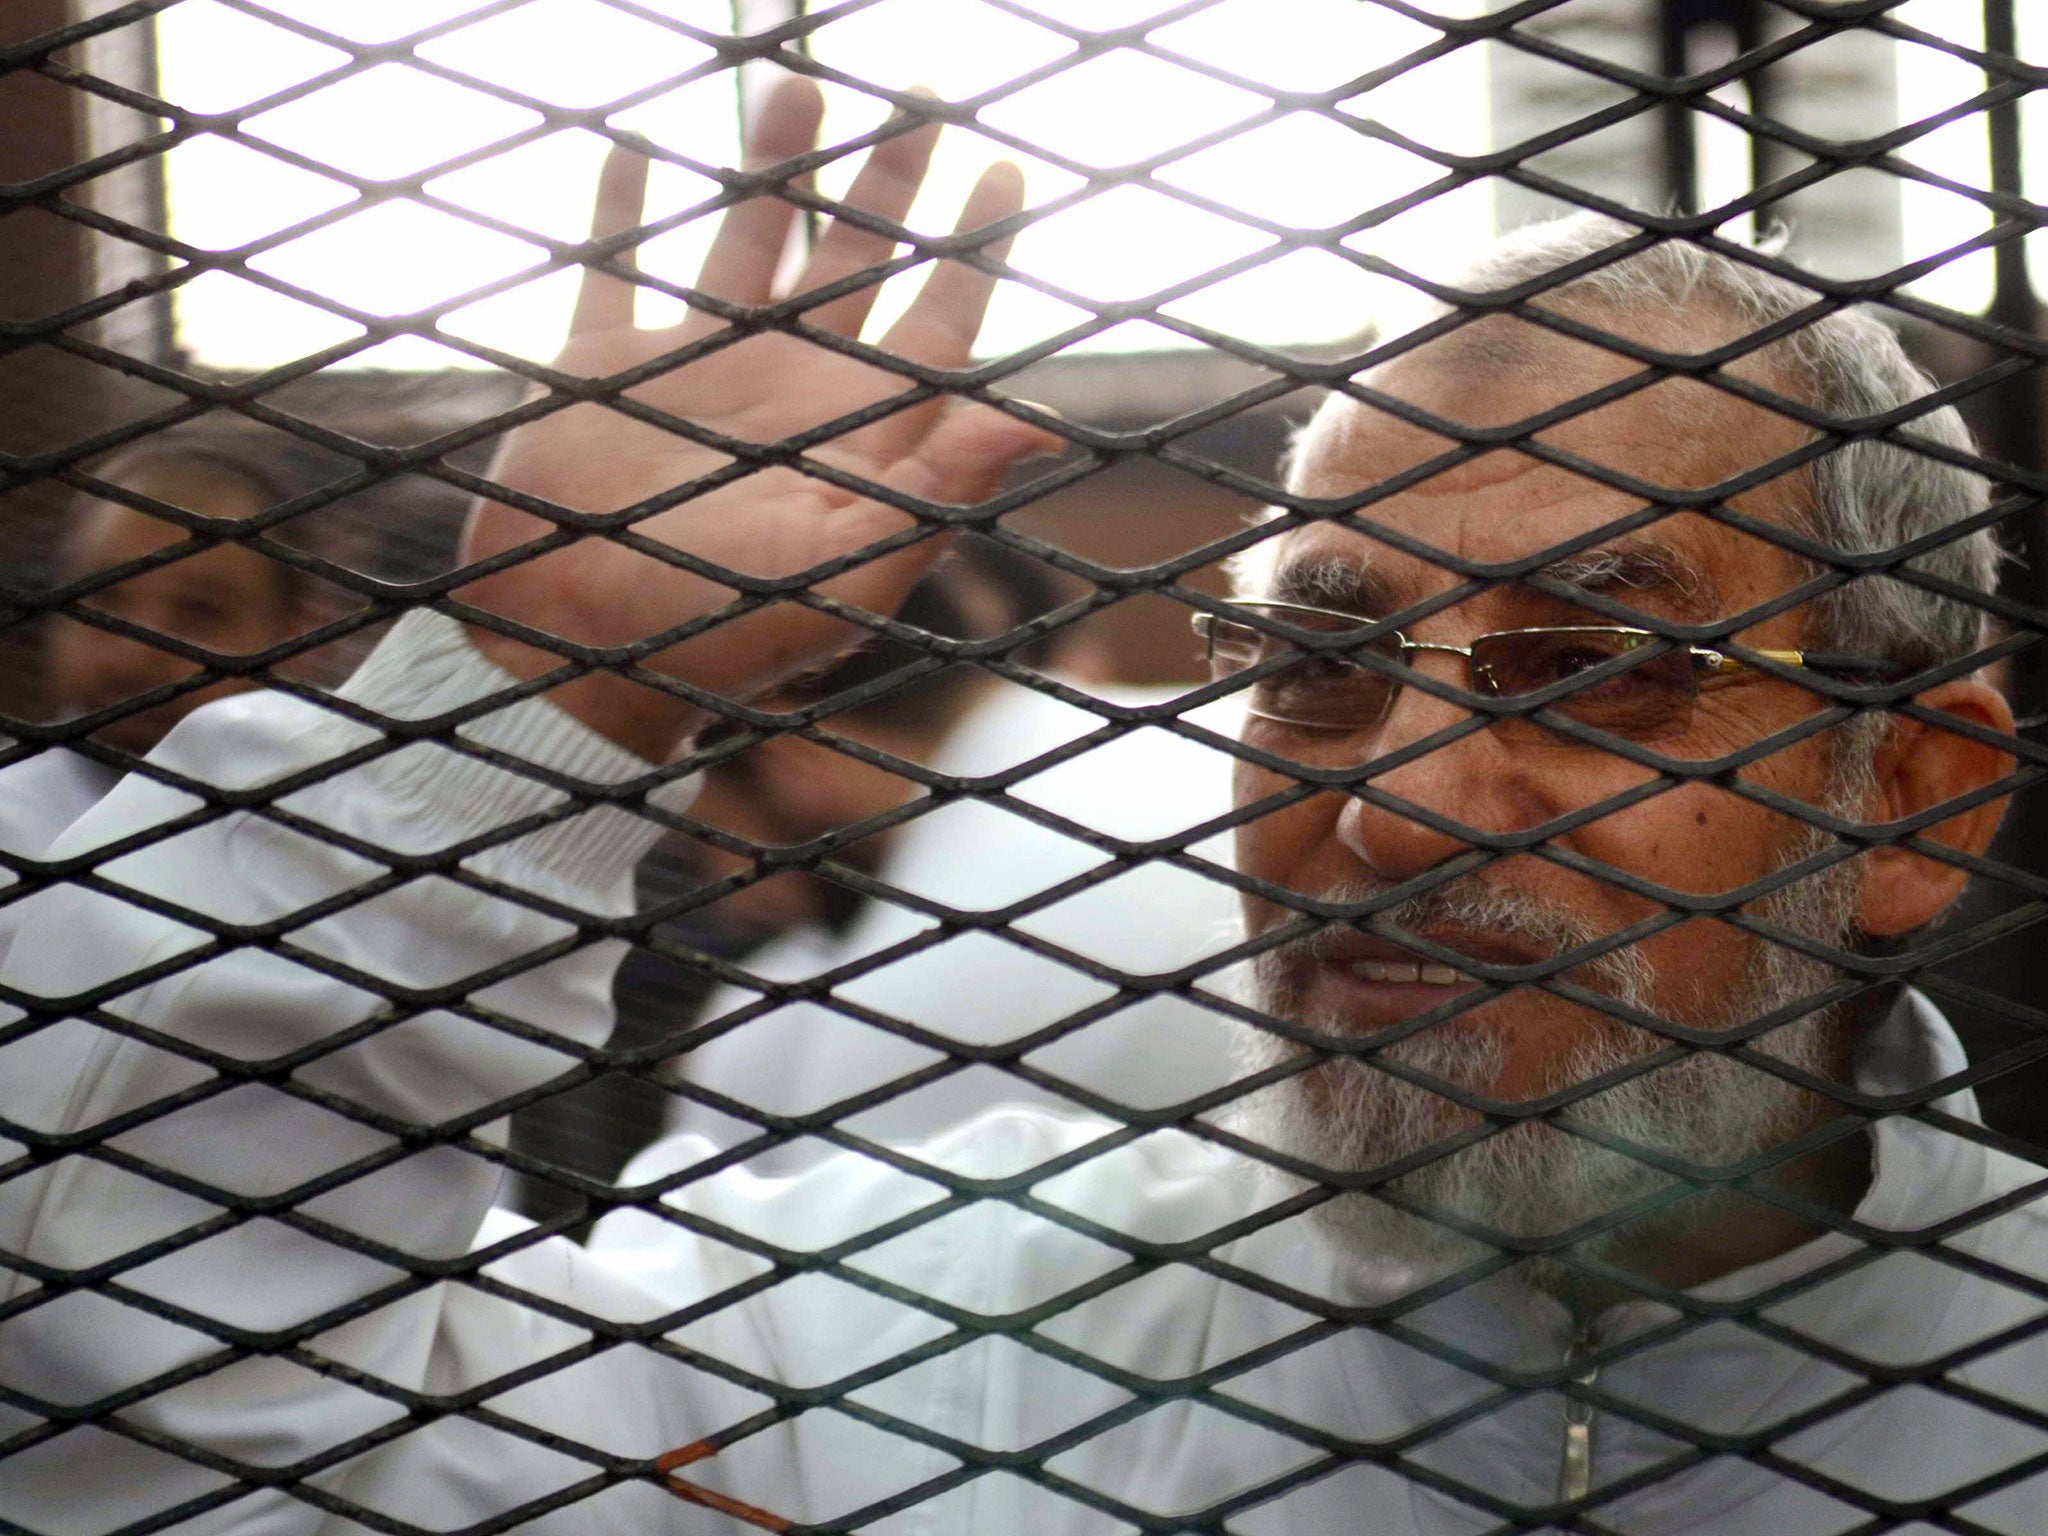 Mohamed Badie and 13 others were sentenced to life in jail on charges of murder and inciting violence